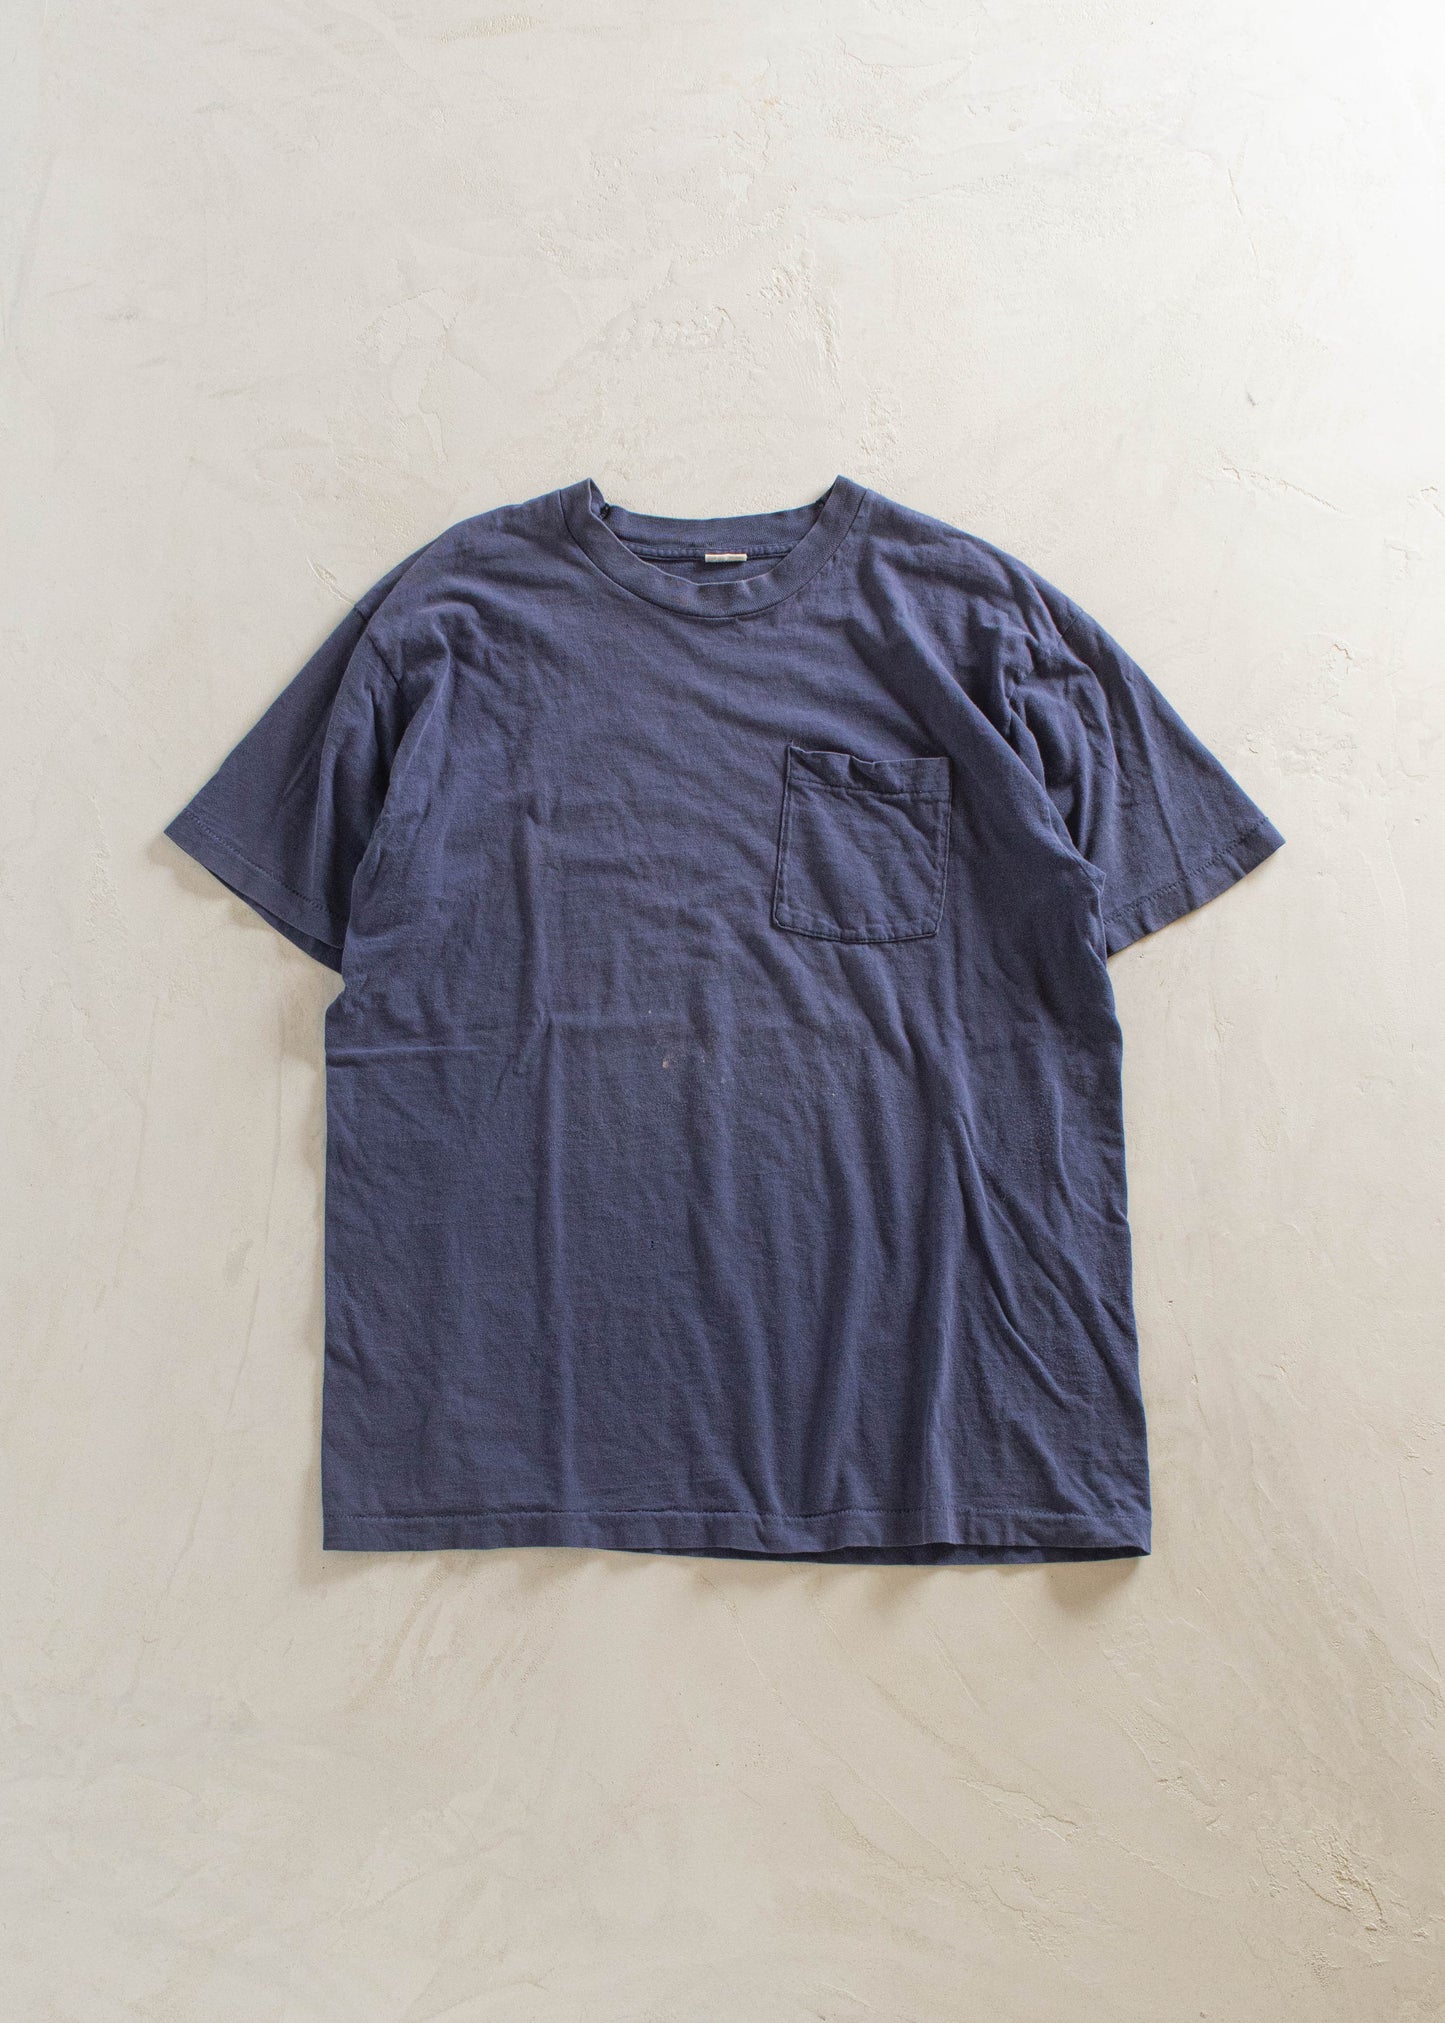 1980s Fruit of the Loom Selvedge Pocket T-Shirt Size L/XL